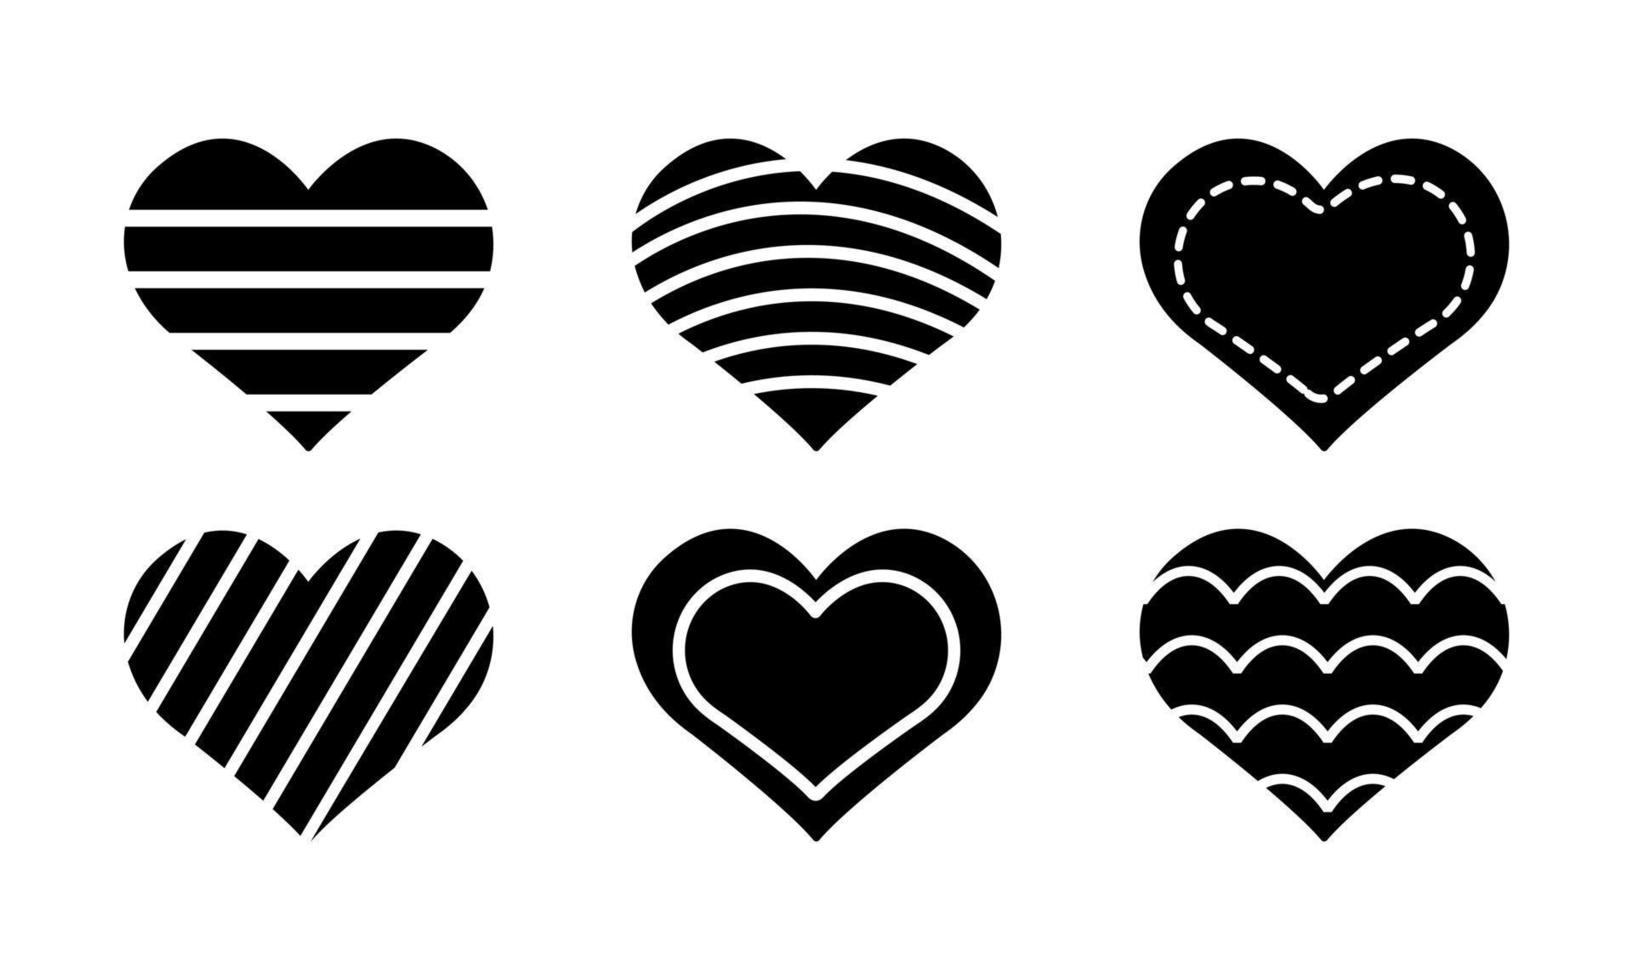 A collection of heart-shaped vector silhouettes for Valentine's Day, anniversaries, wedding, celebrations and website decor are isolated on a white background.